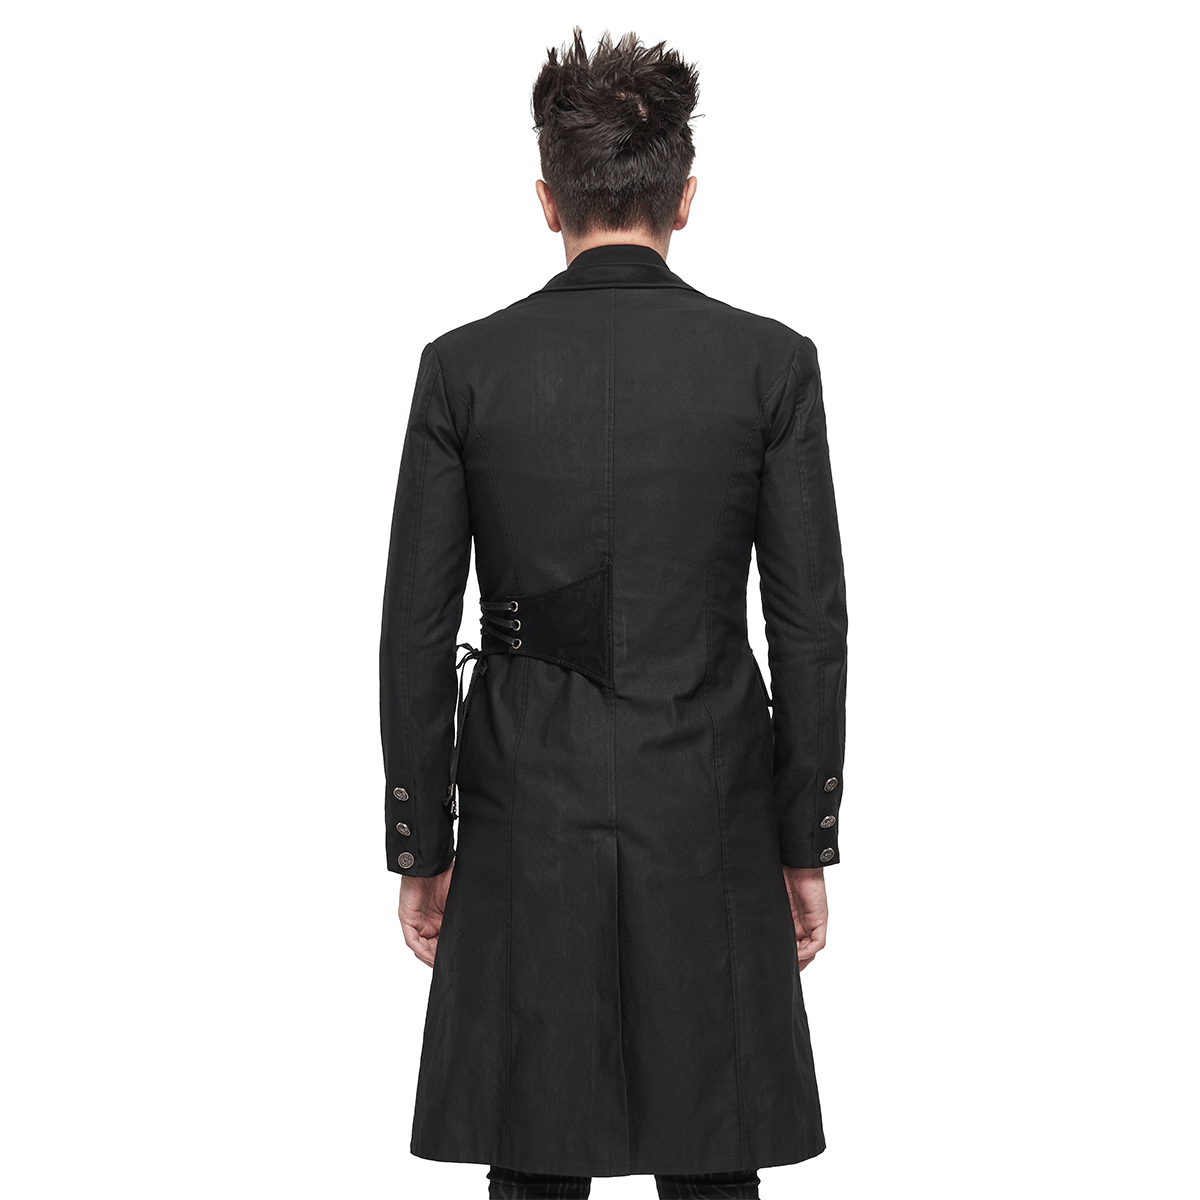 Gothic Punk Mid-Length Black Coat / Men's Slim fit Coat With Pins and Lace-up - HARD'N'HEAVY